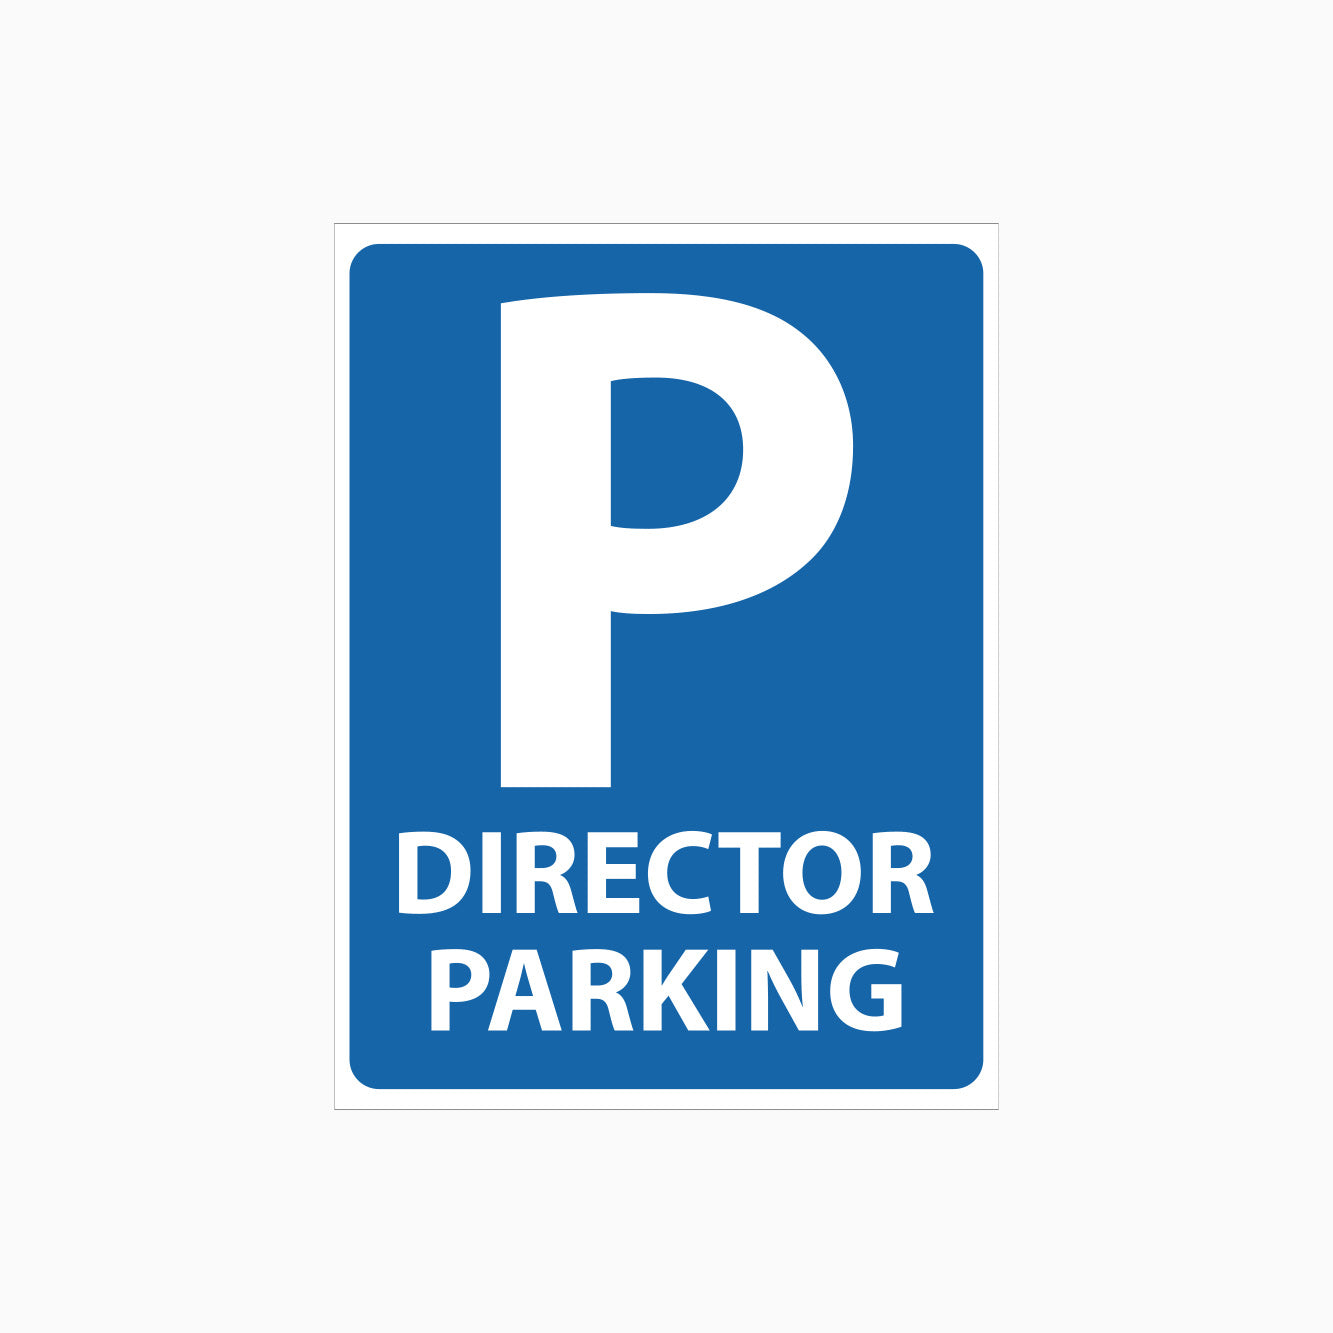 DIRECTOR PARKING SIGN - PARKING SIGNS AND MORE AT GET SIGNS - SHOP ONLINE